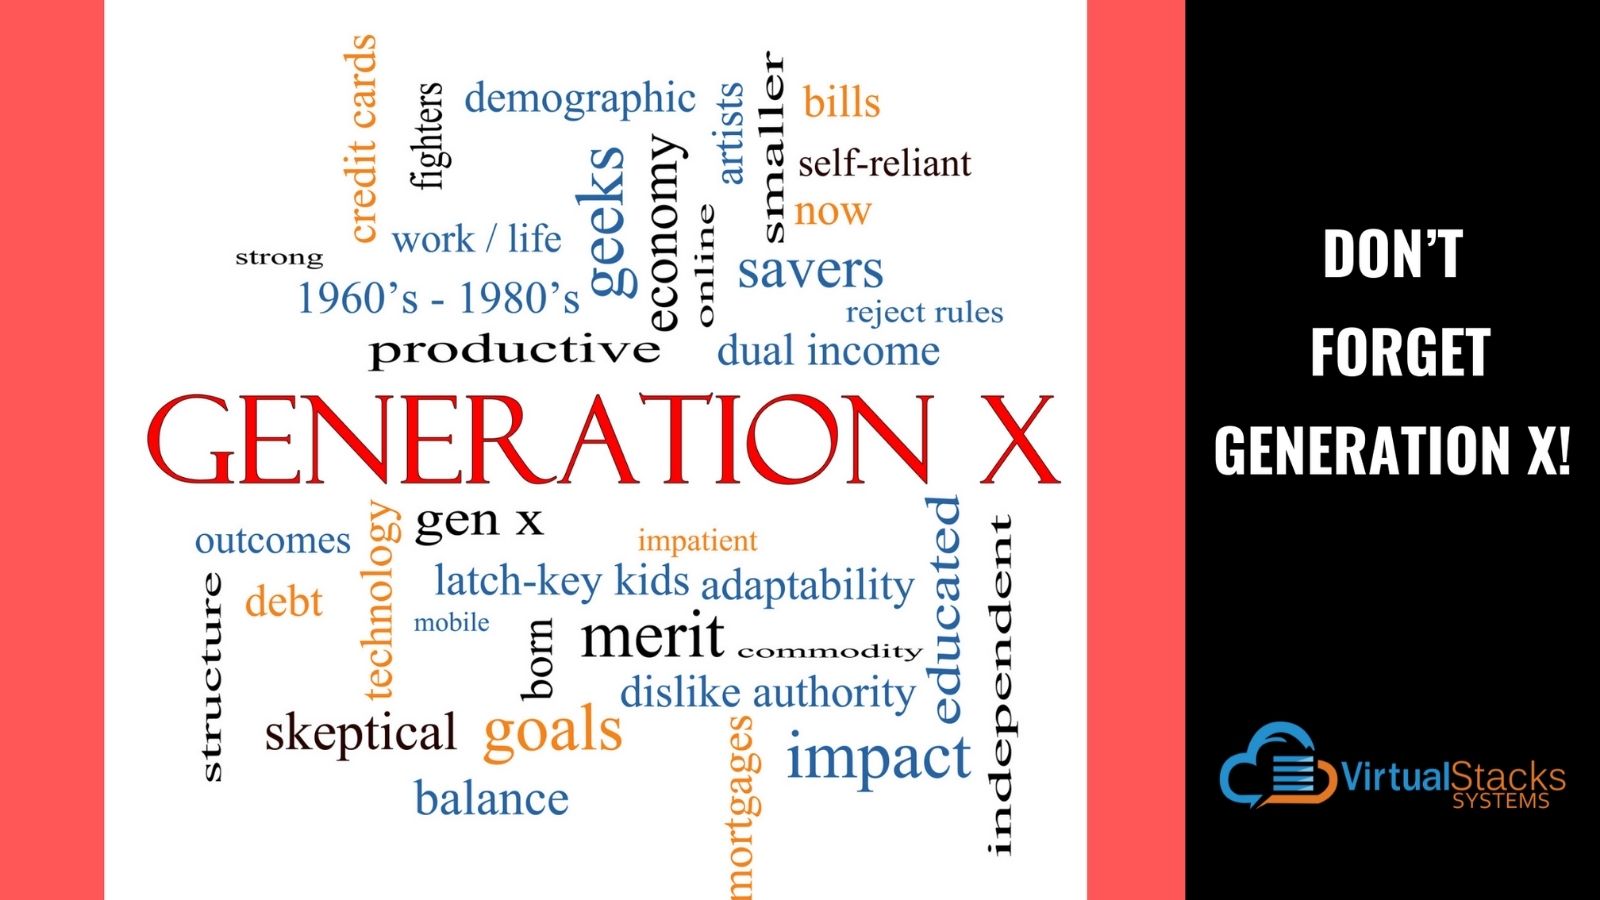 Don’t Forget Generation X!